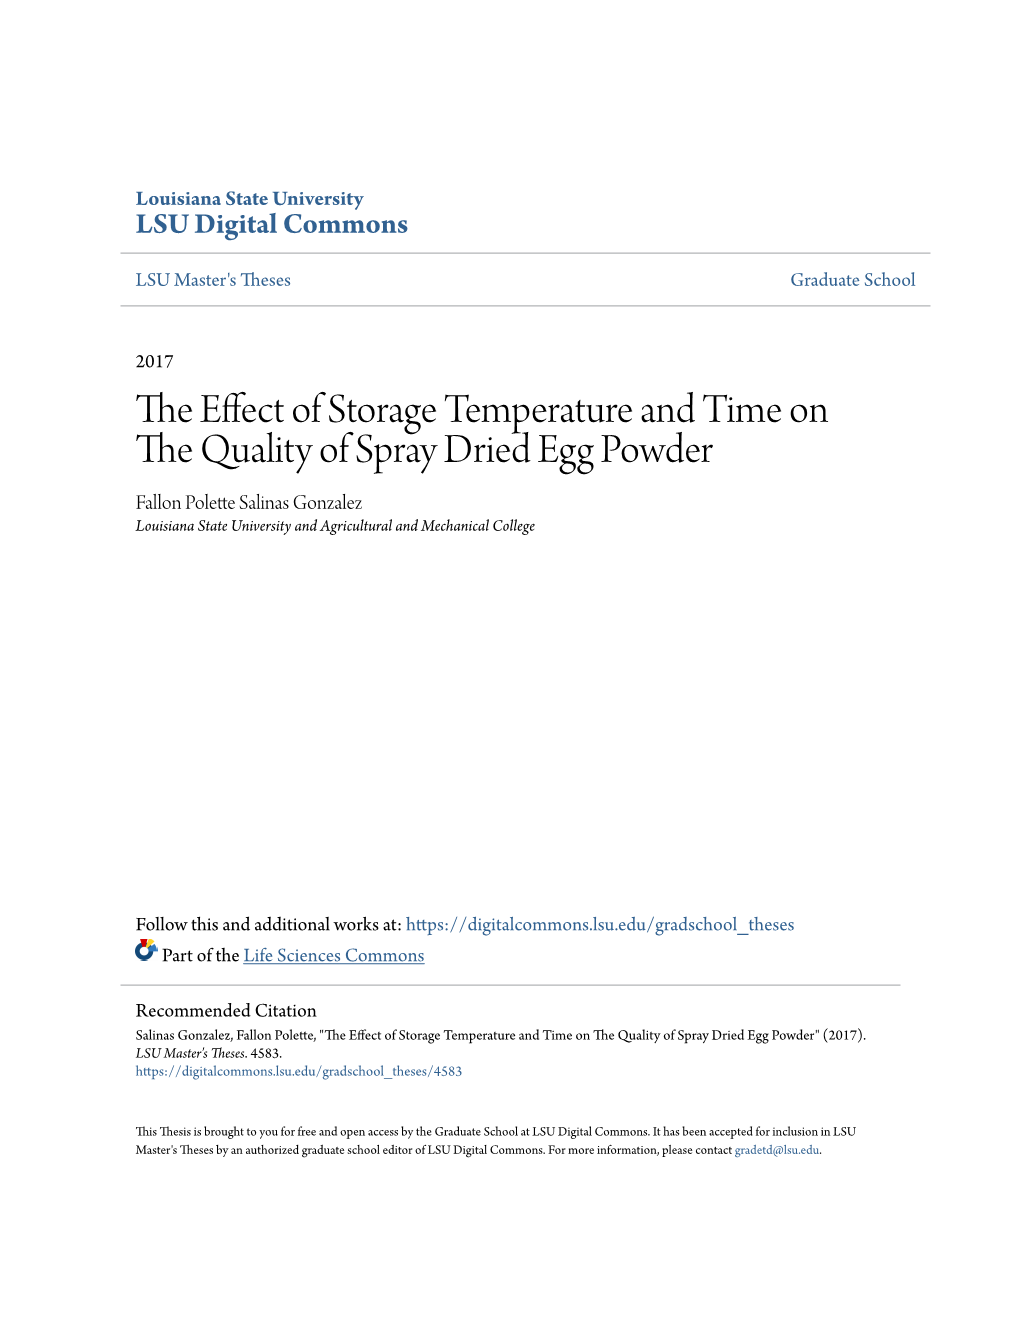 The Effect of Storage Temperature and Time on the Quality of Spray Dried Egg Powder" (2017)